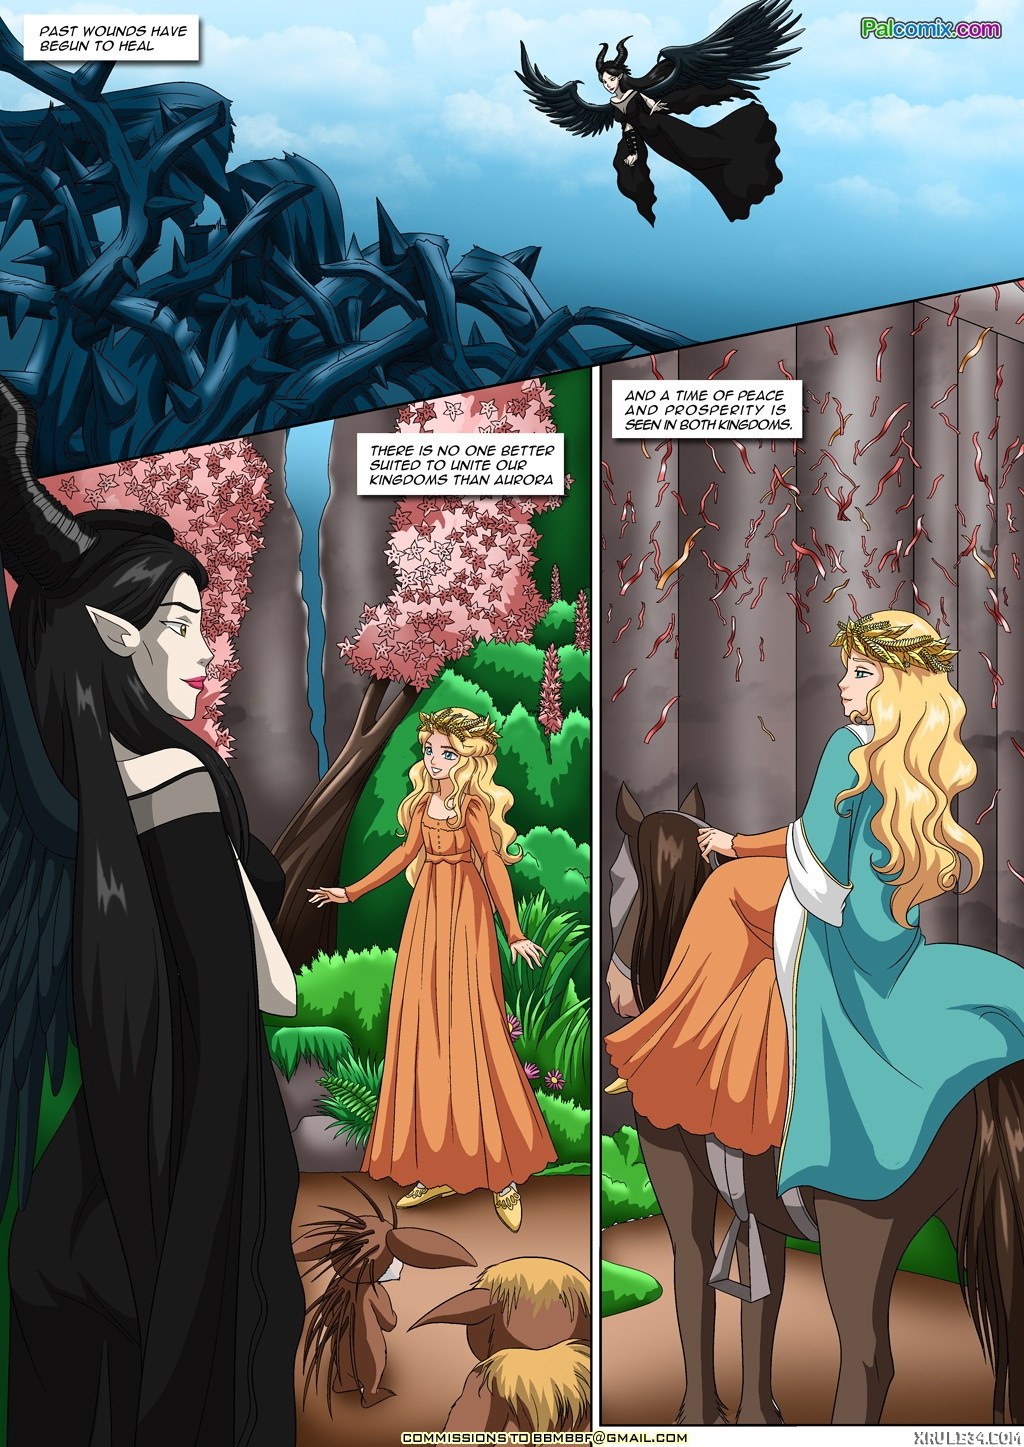 Coming of Age - Sleeping Beauty - Page 2